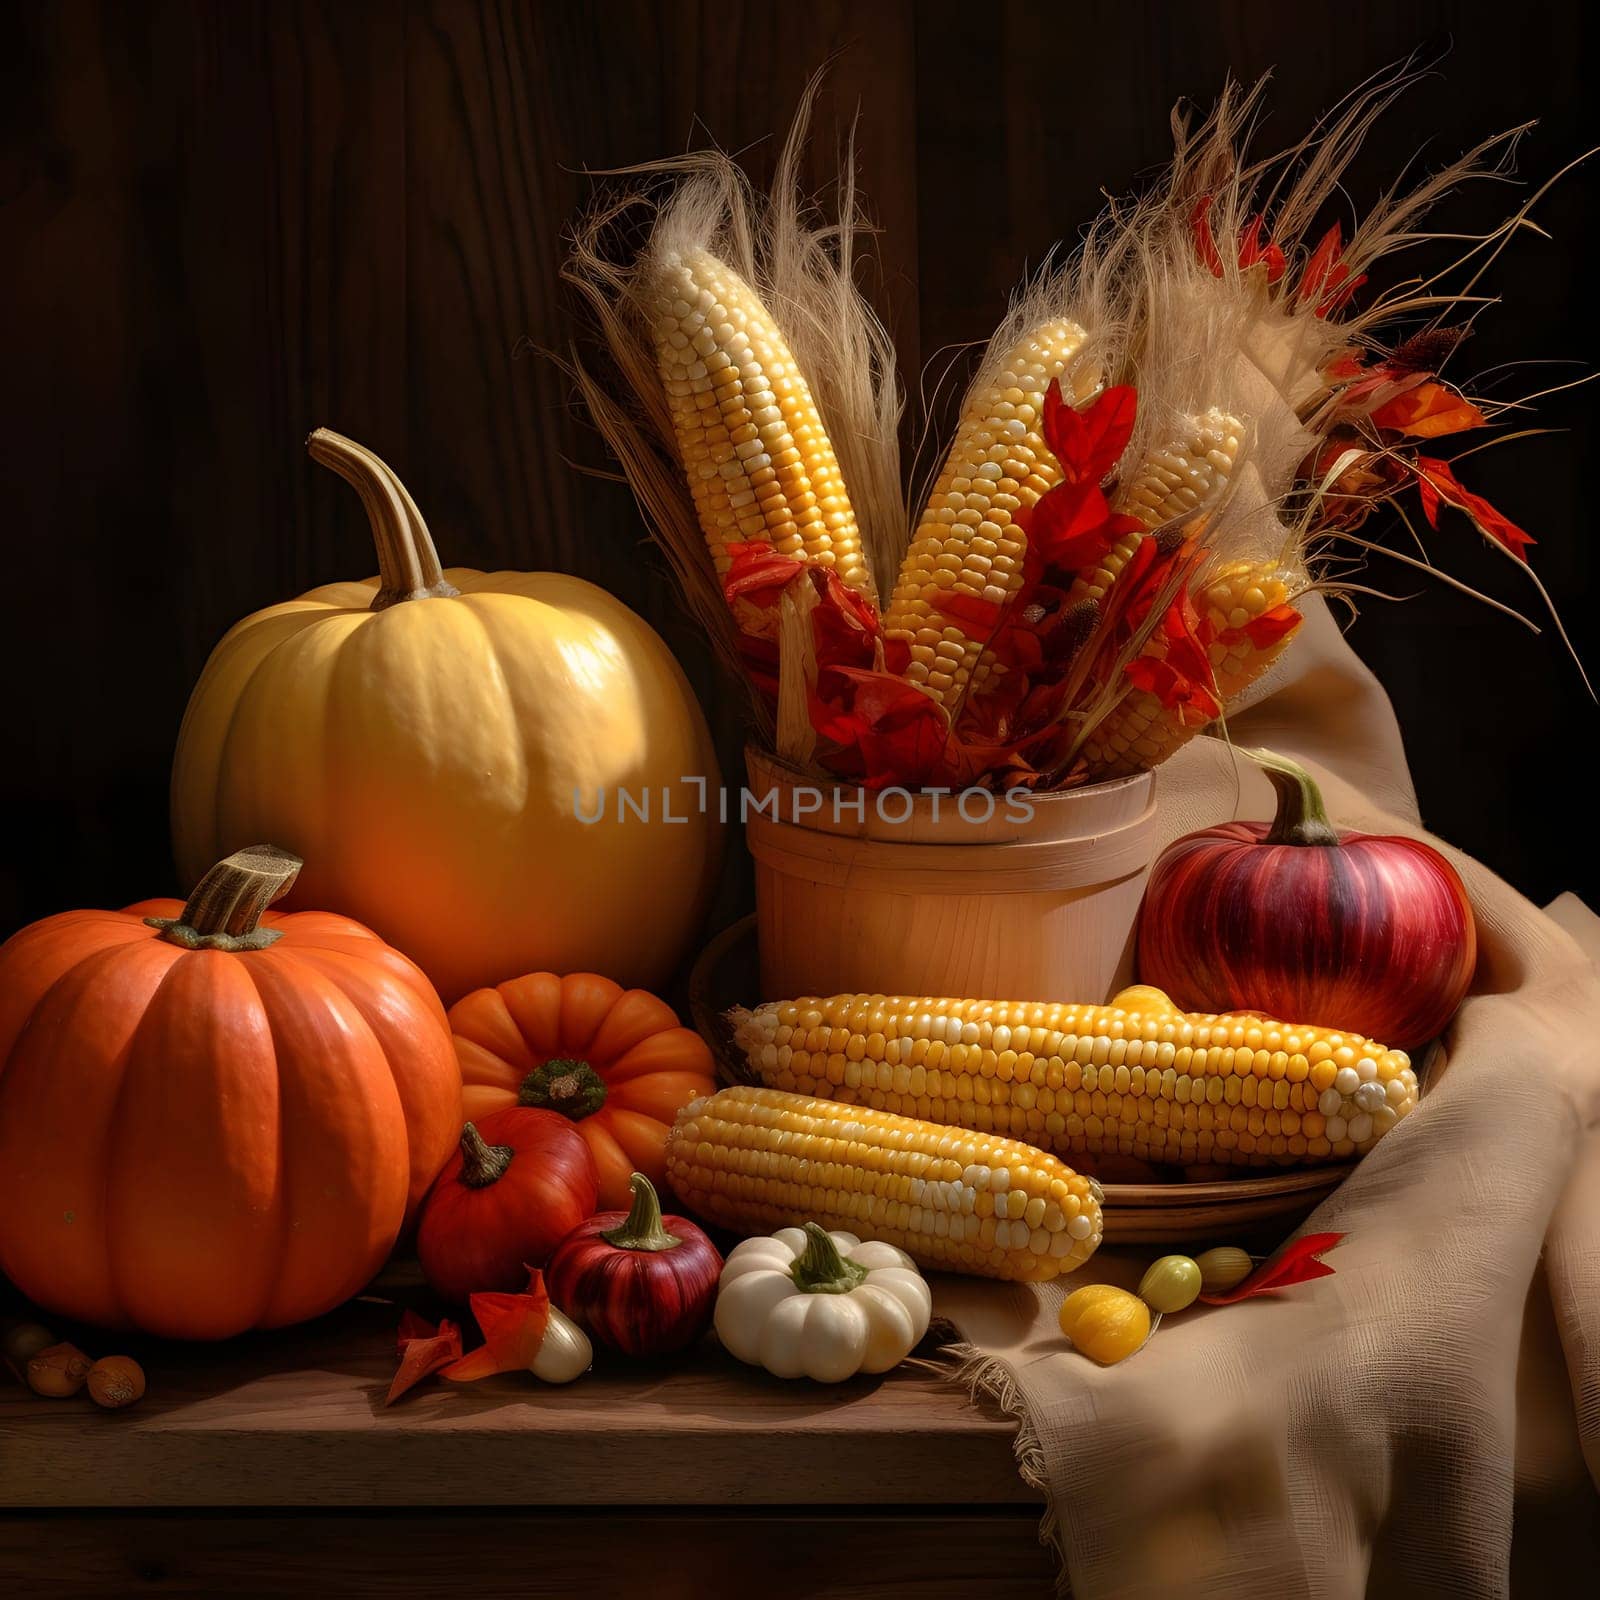 Elegantly arranged crops from the field, pumpkins and corn on a dark wooden background. Pumpkin as a dish of thanksgiving for the harvest. An atmosphere of joy and celebration.